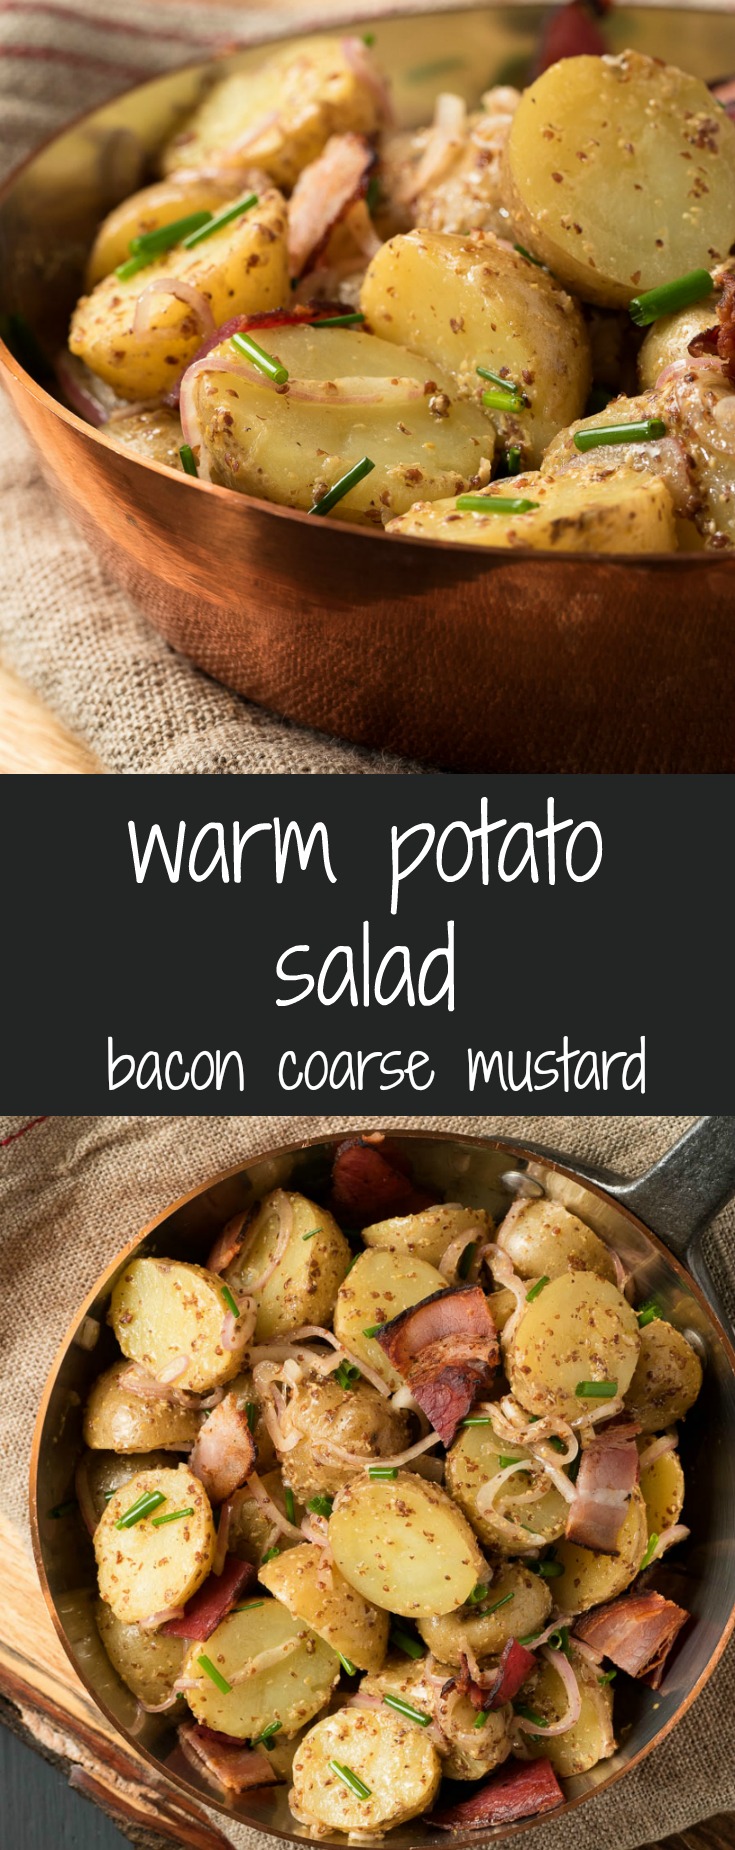 Warm potato salad with bacon makes a great side any time you grill.